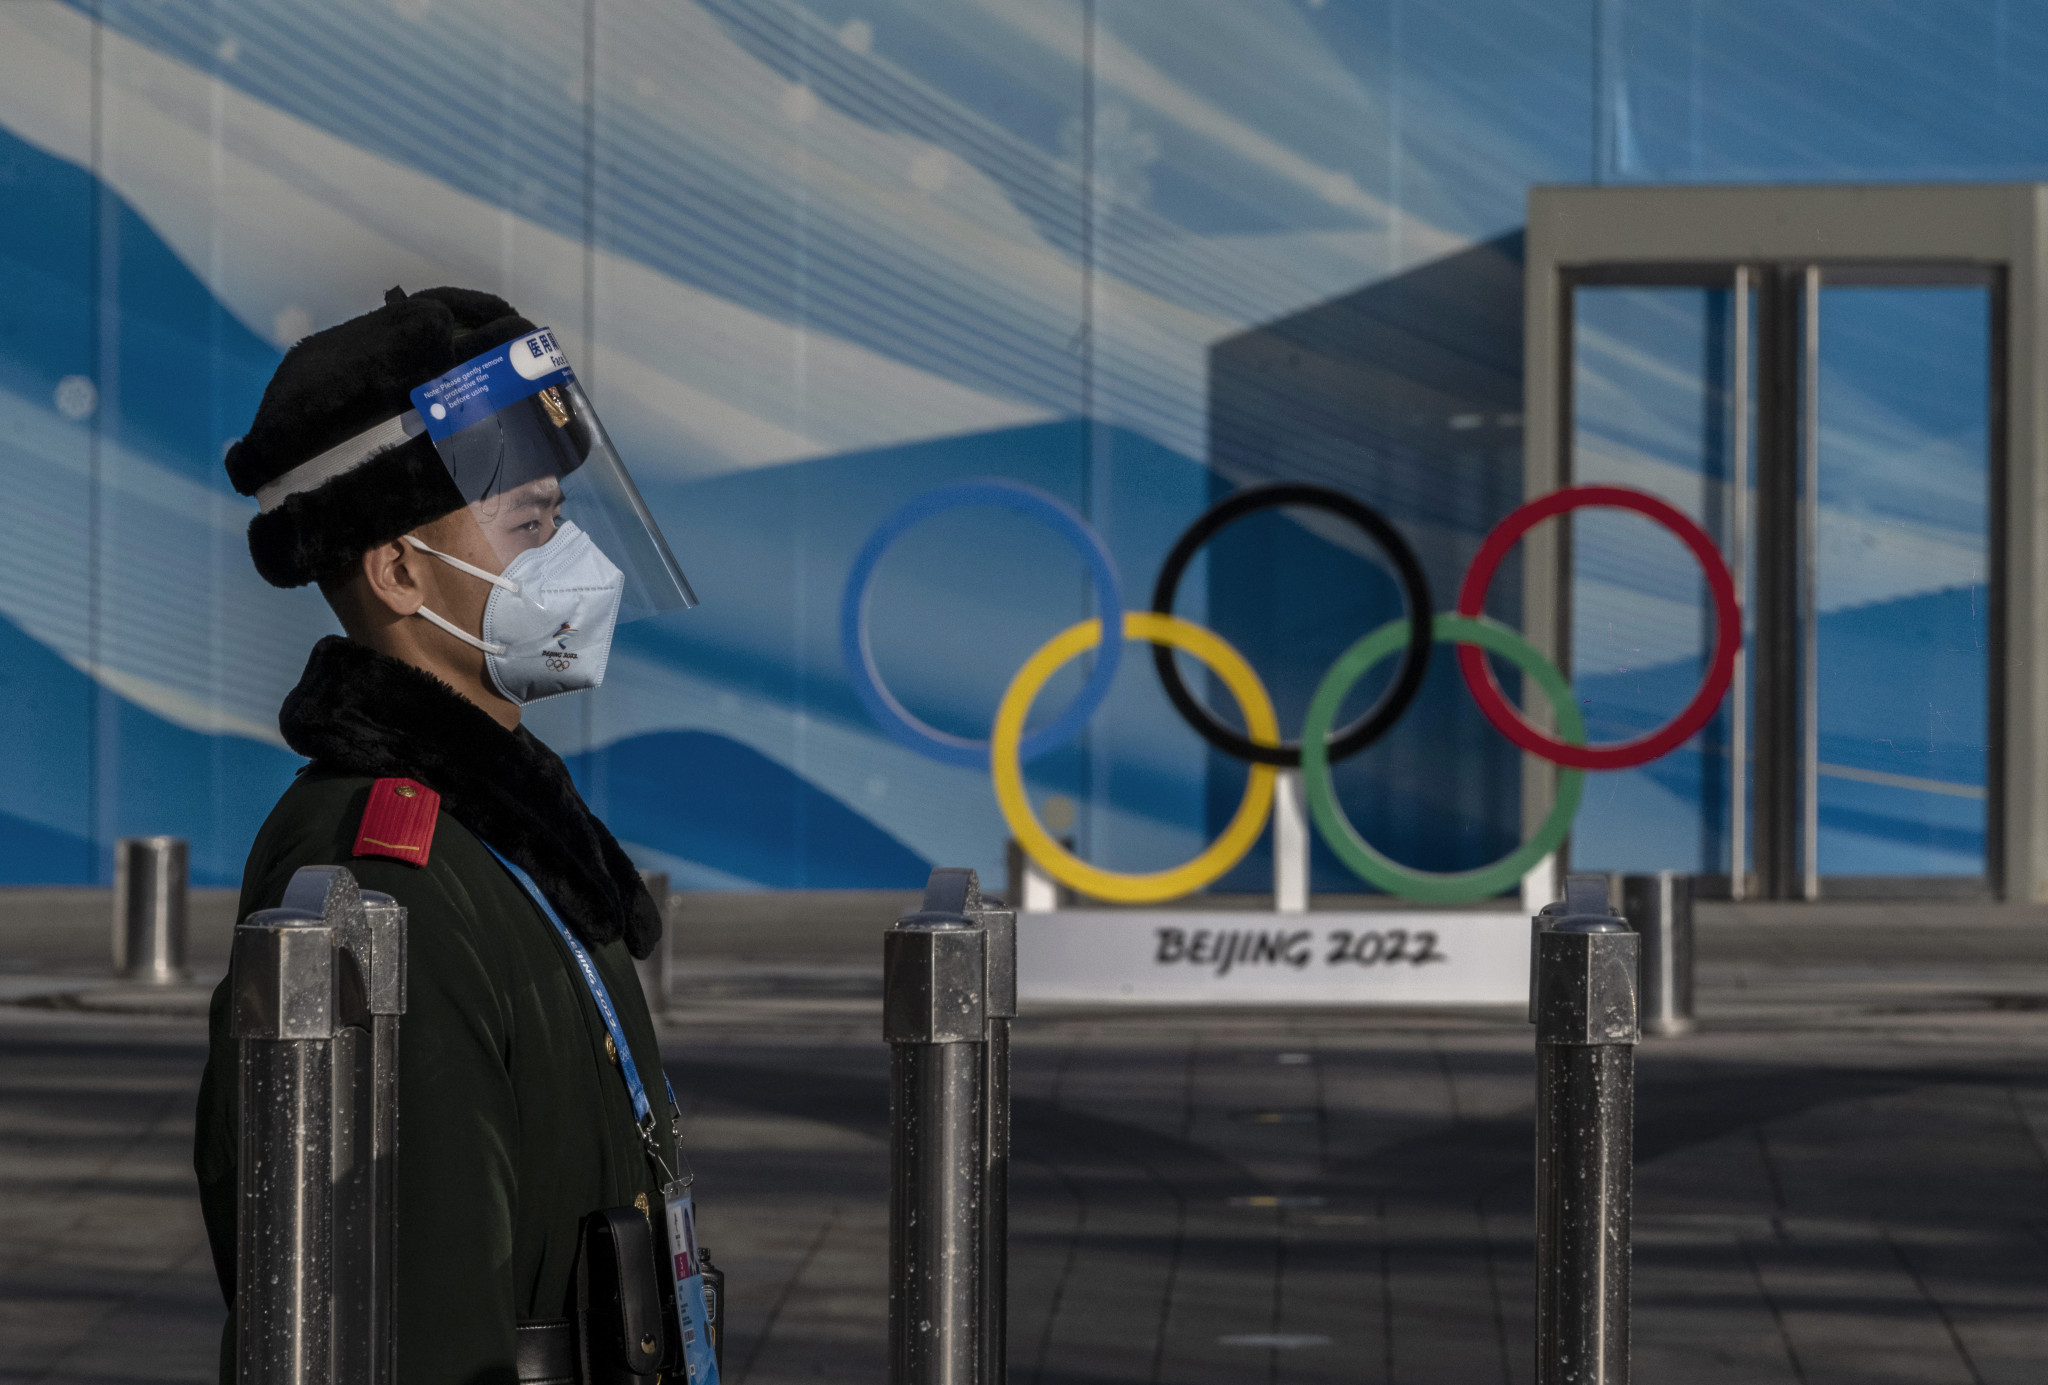 A further 32 cases of COVID-19 have been reported by Beijing 2022 ©Getty Images